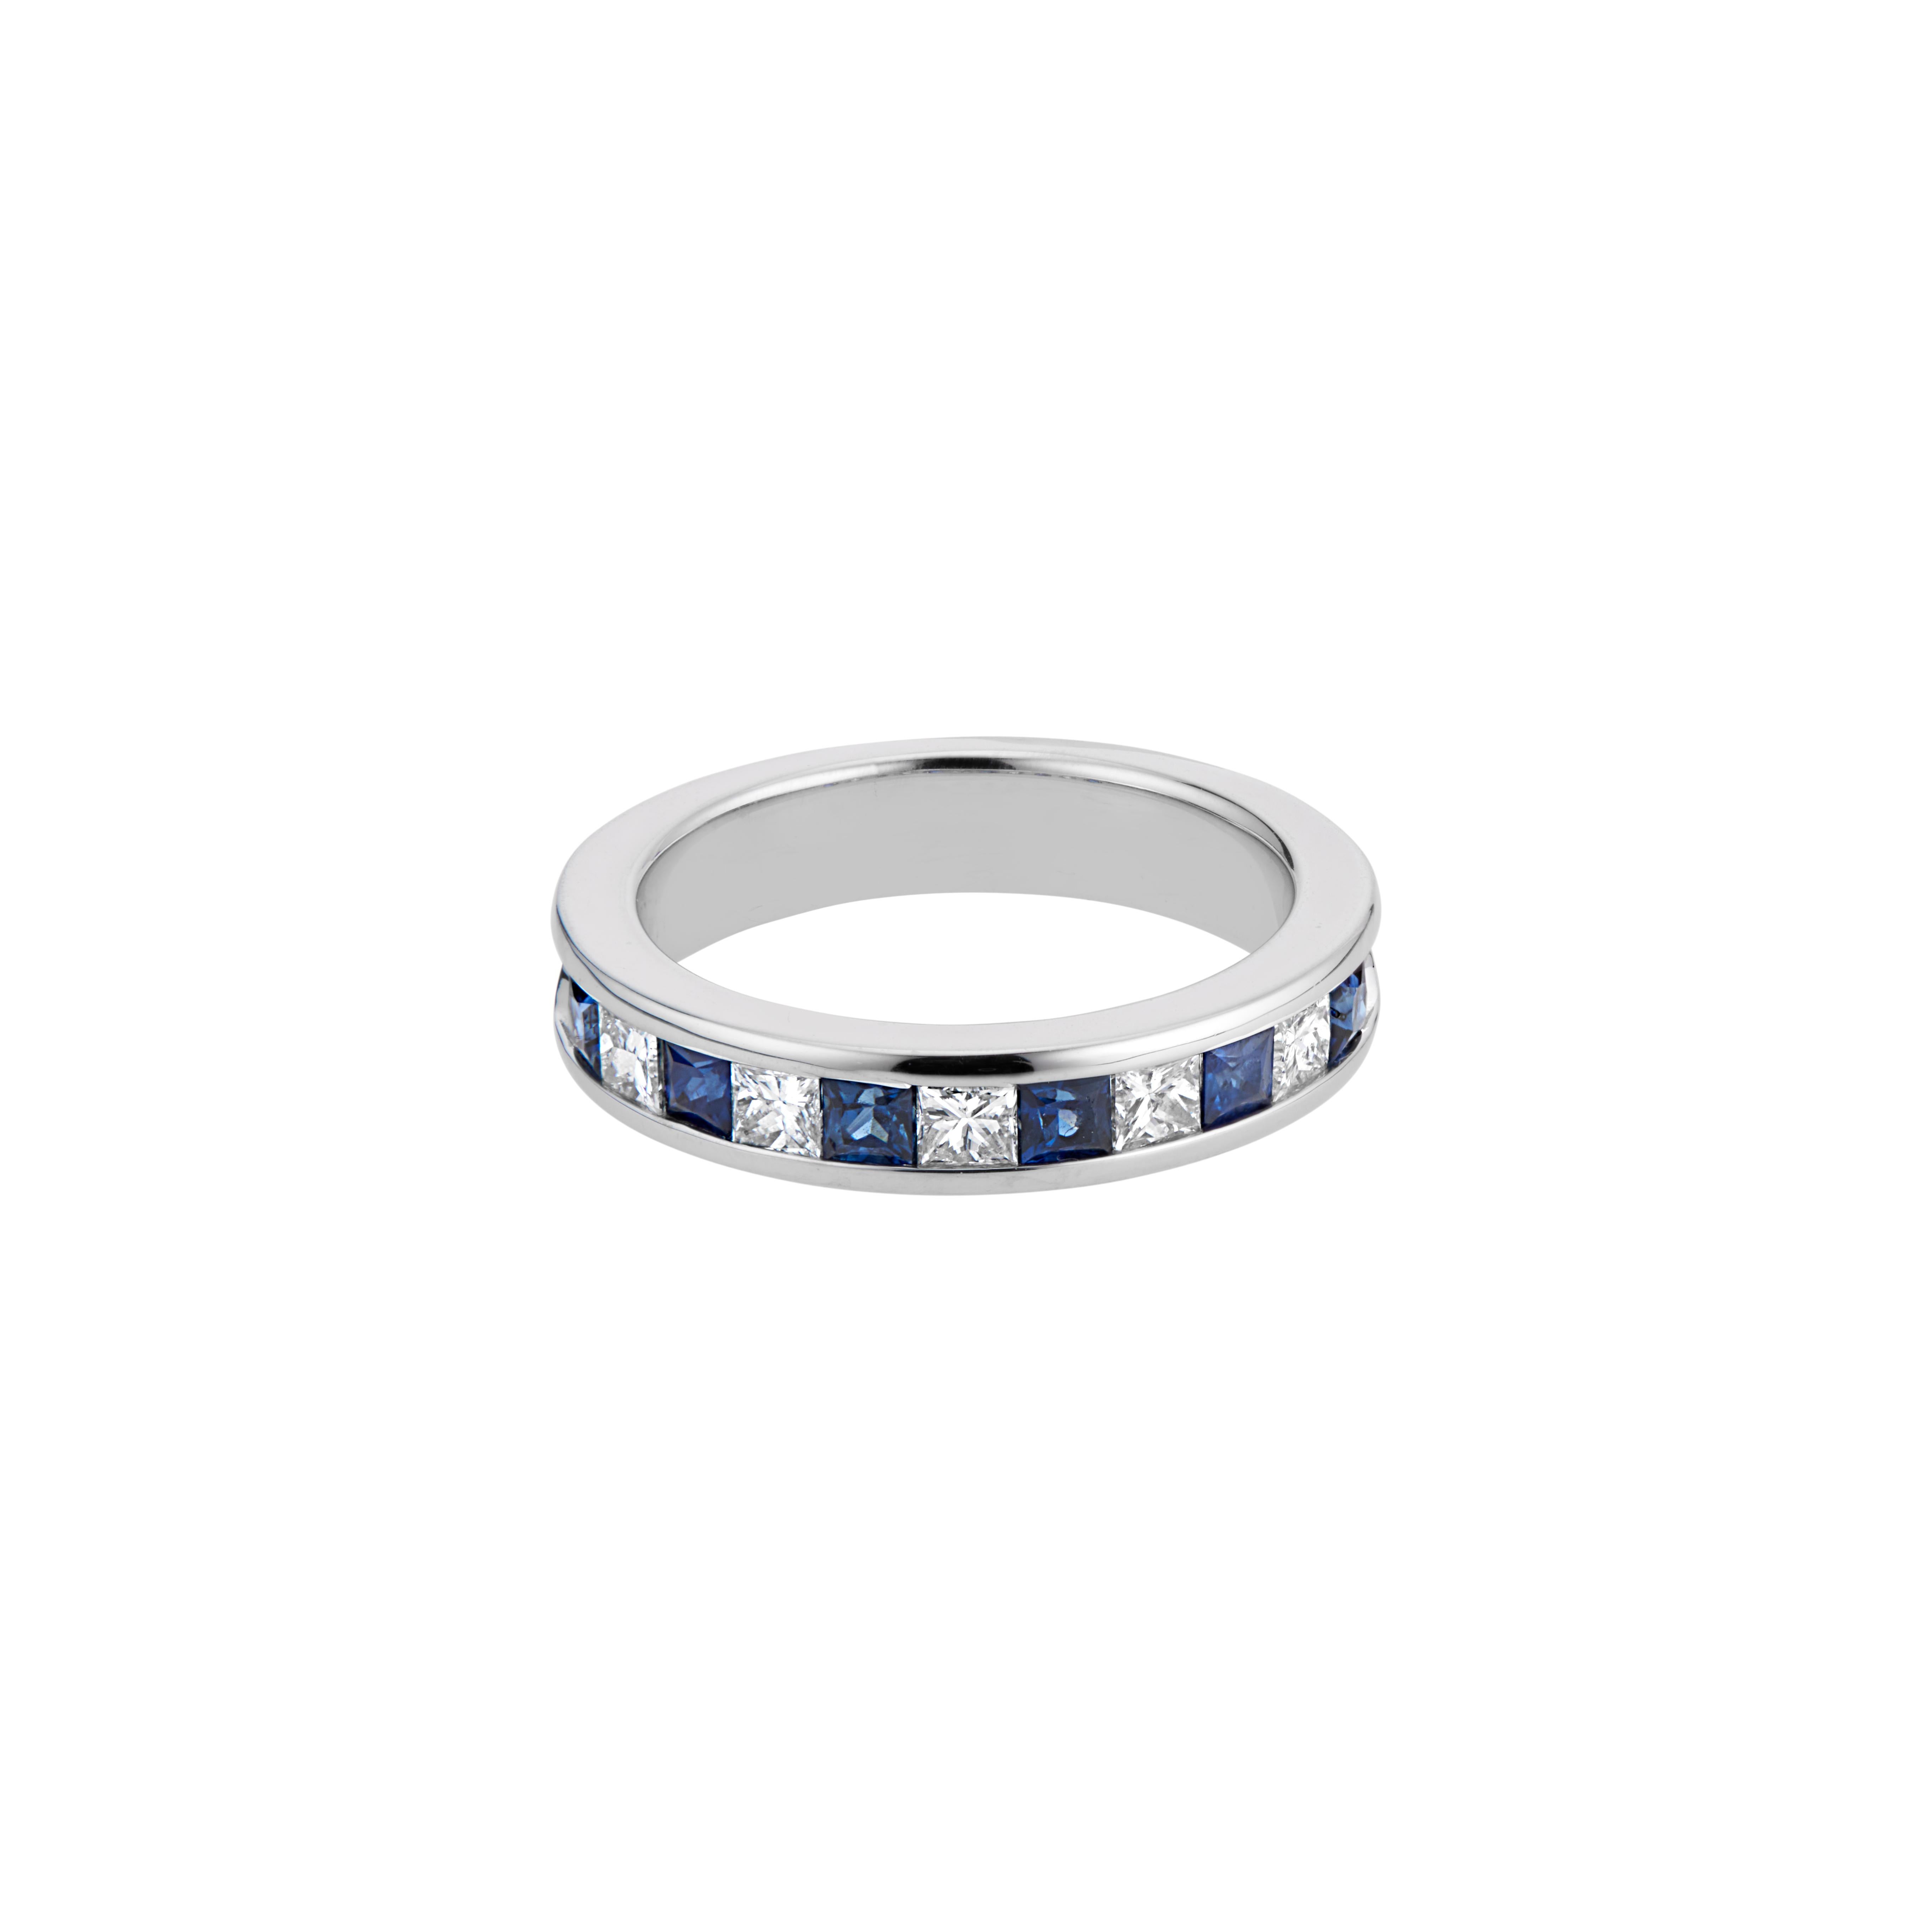 Sapphire and diamond wedding band ring. 6 square cut blue sapphires alternating with 5 princess cut diamonds, set in a 14k white gold channel set wedding band ring. 

6 square cut blue sapphires, approx. .54cts
5 princess cut diamonds, H-I VS-SI